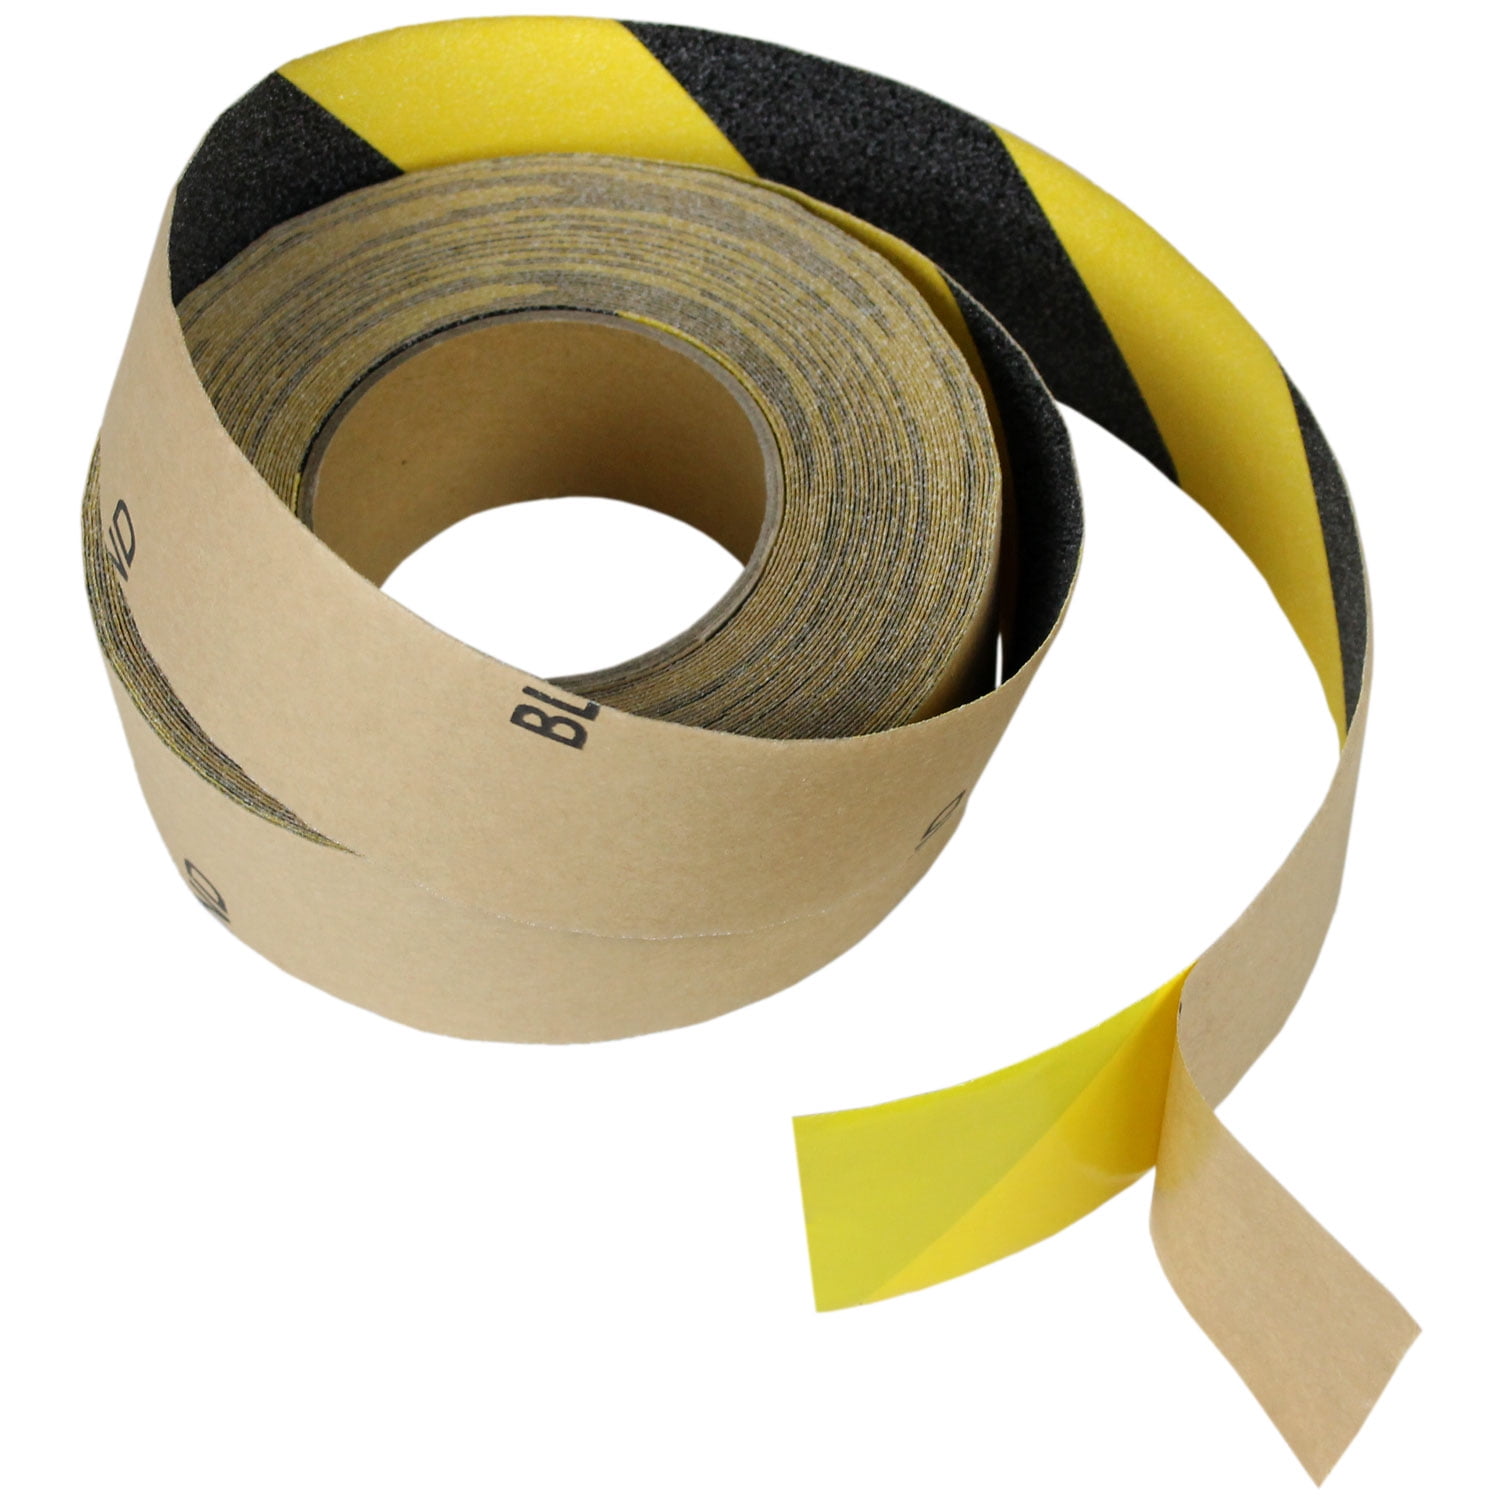 12" 5'-50' Anti Slip Tape Roll Safety Non Skid Grip Safe Grit Application Tool 